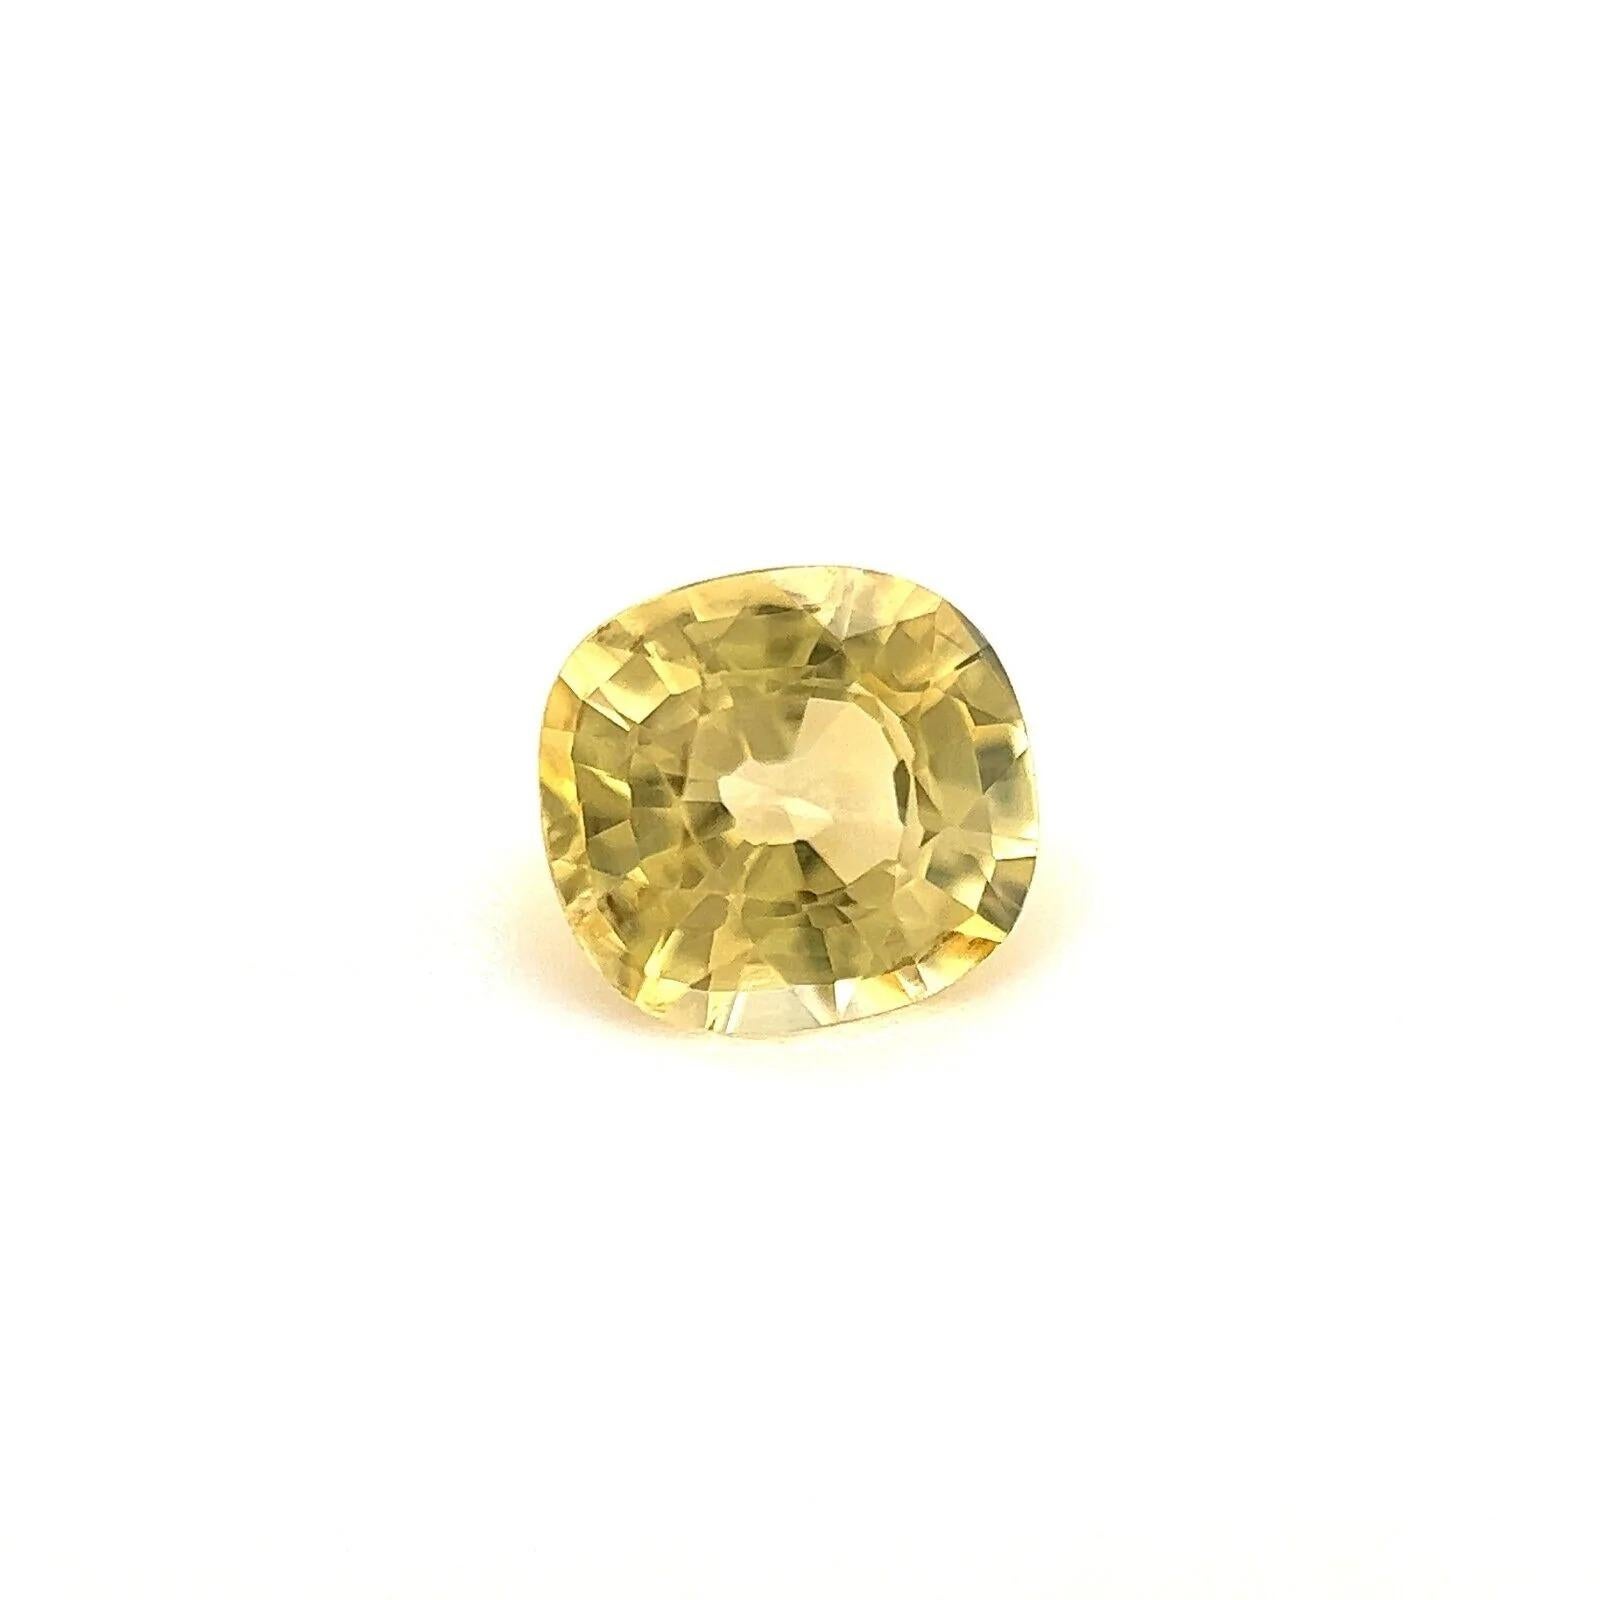 Natural Light Yellow Ceylon Sapphire 0.55ct Cushion Cut Rare Loose Gem 4.8x4.5mm

Natural Ceylon Yellow Sapphire Loose Gemstone
0.55 Carat with a beautiful yellow colour and excellent clarity, very clean stone. Also has an excellent cushion cut and